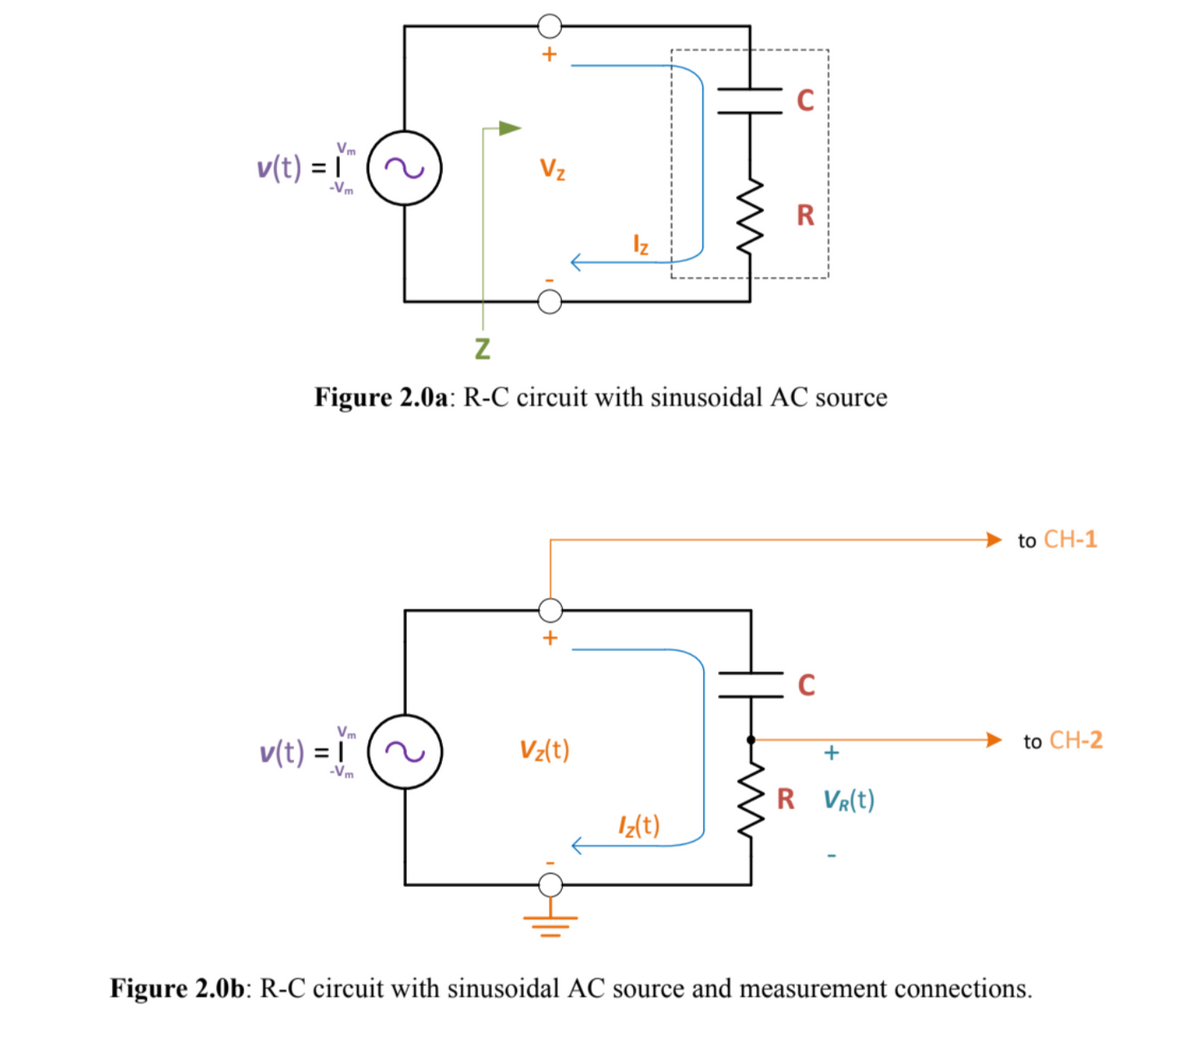 v(t) = |
-Vm
C
Vm
Vz
R
Z
Figure 2.0a: R-C circuit with sinusoidal AC source
+
C
to CH-1
Vm
to CH-2
v(t) = |
Vz(t)
+
-Vm
R VR(t)
Iz(t)
Figure 2.0b: R-C circuit with sinusoidal AC source and measurement connections.